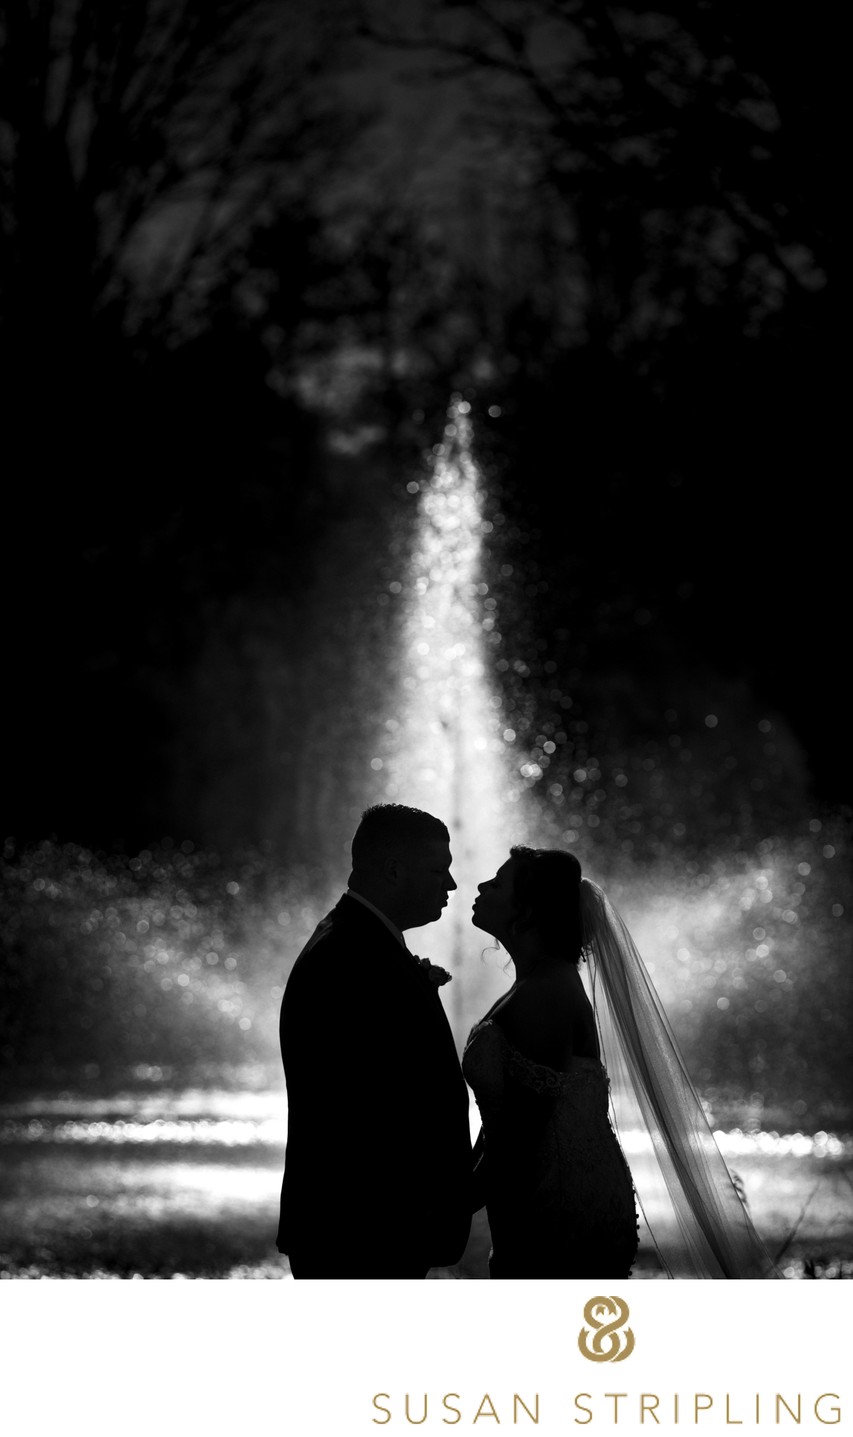 best wedding silhouette with water